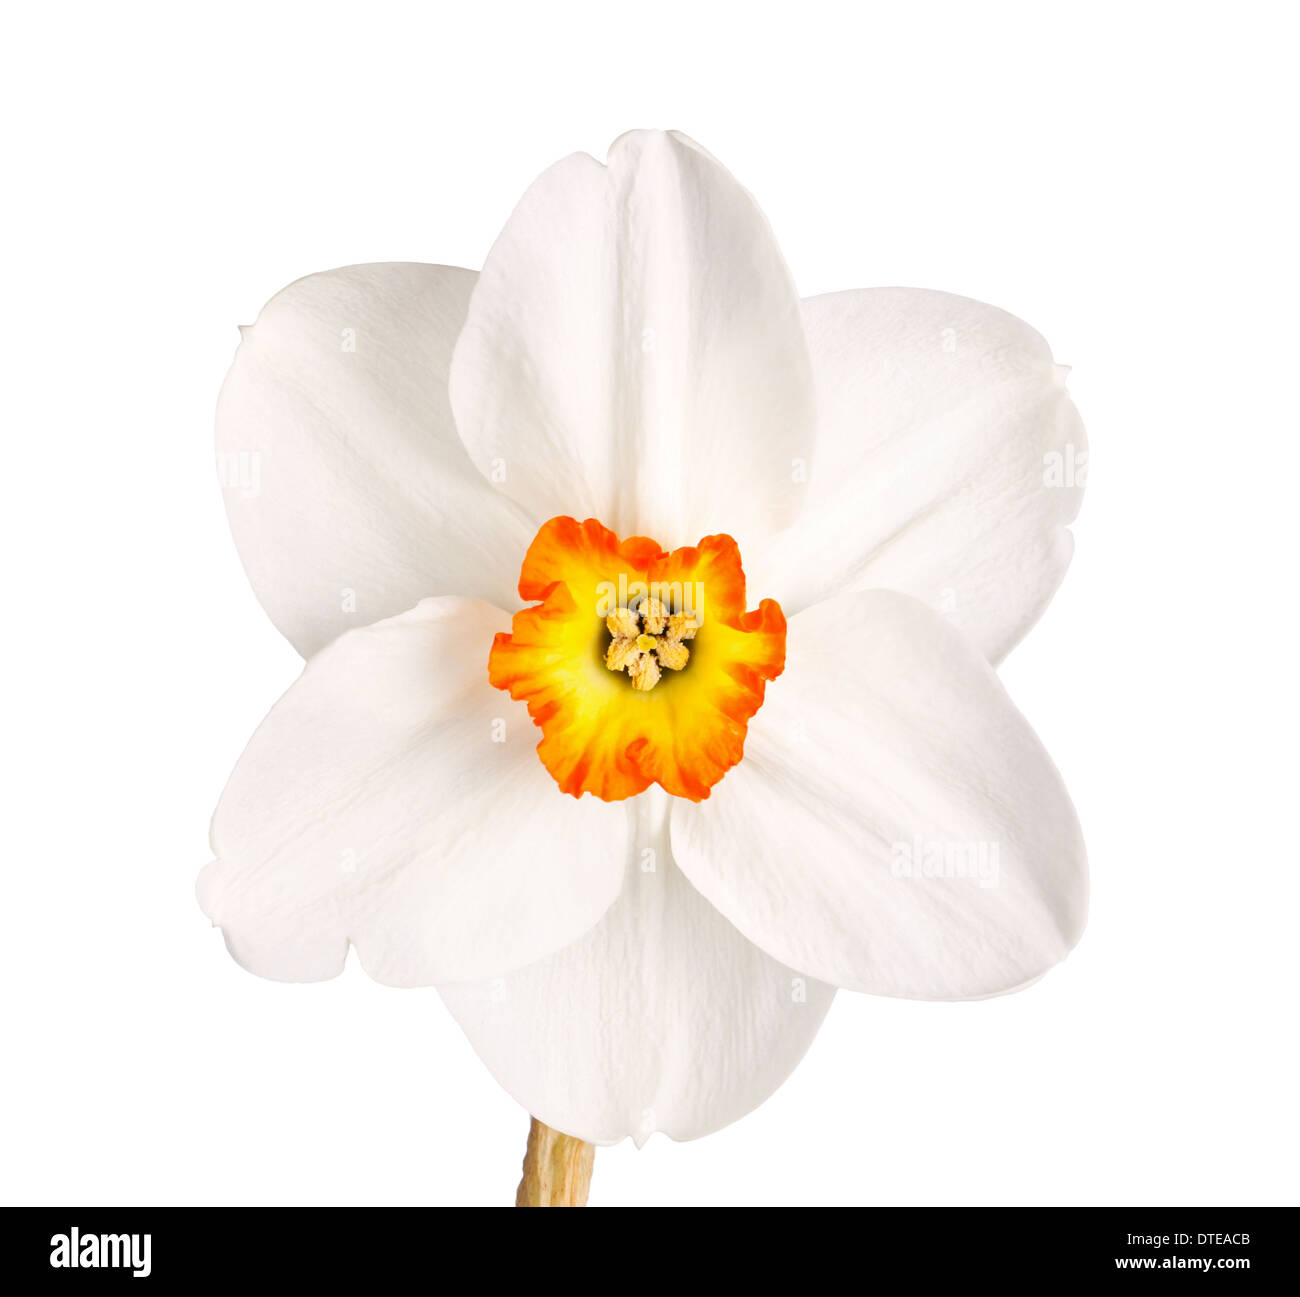 Single flower and stem of the red-rimmed, small yellow cup daffodil cultivar Excitement against a white background Stock Photo